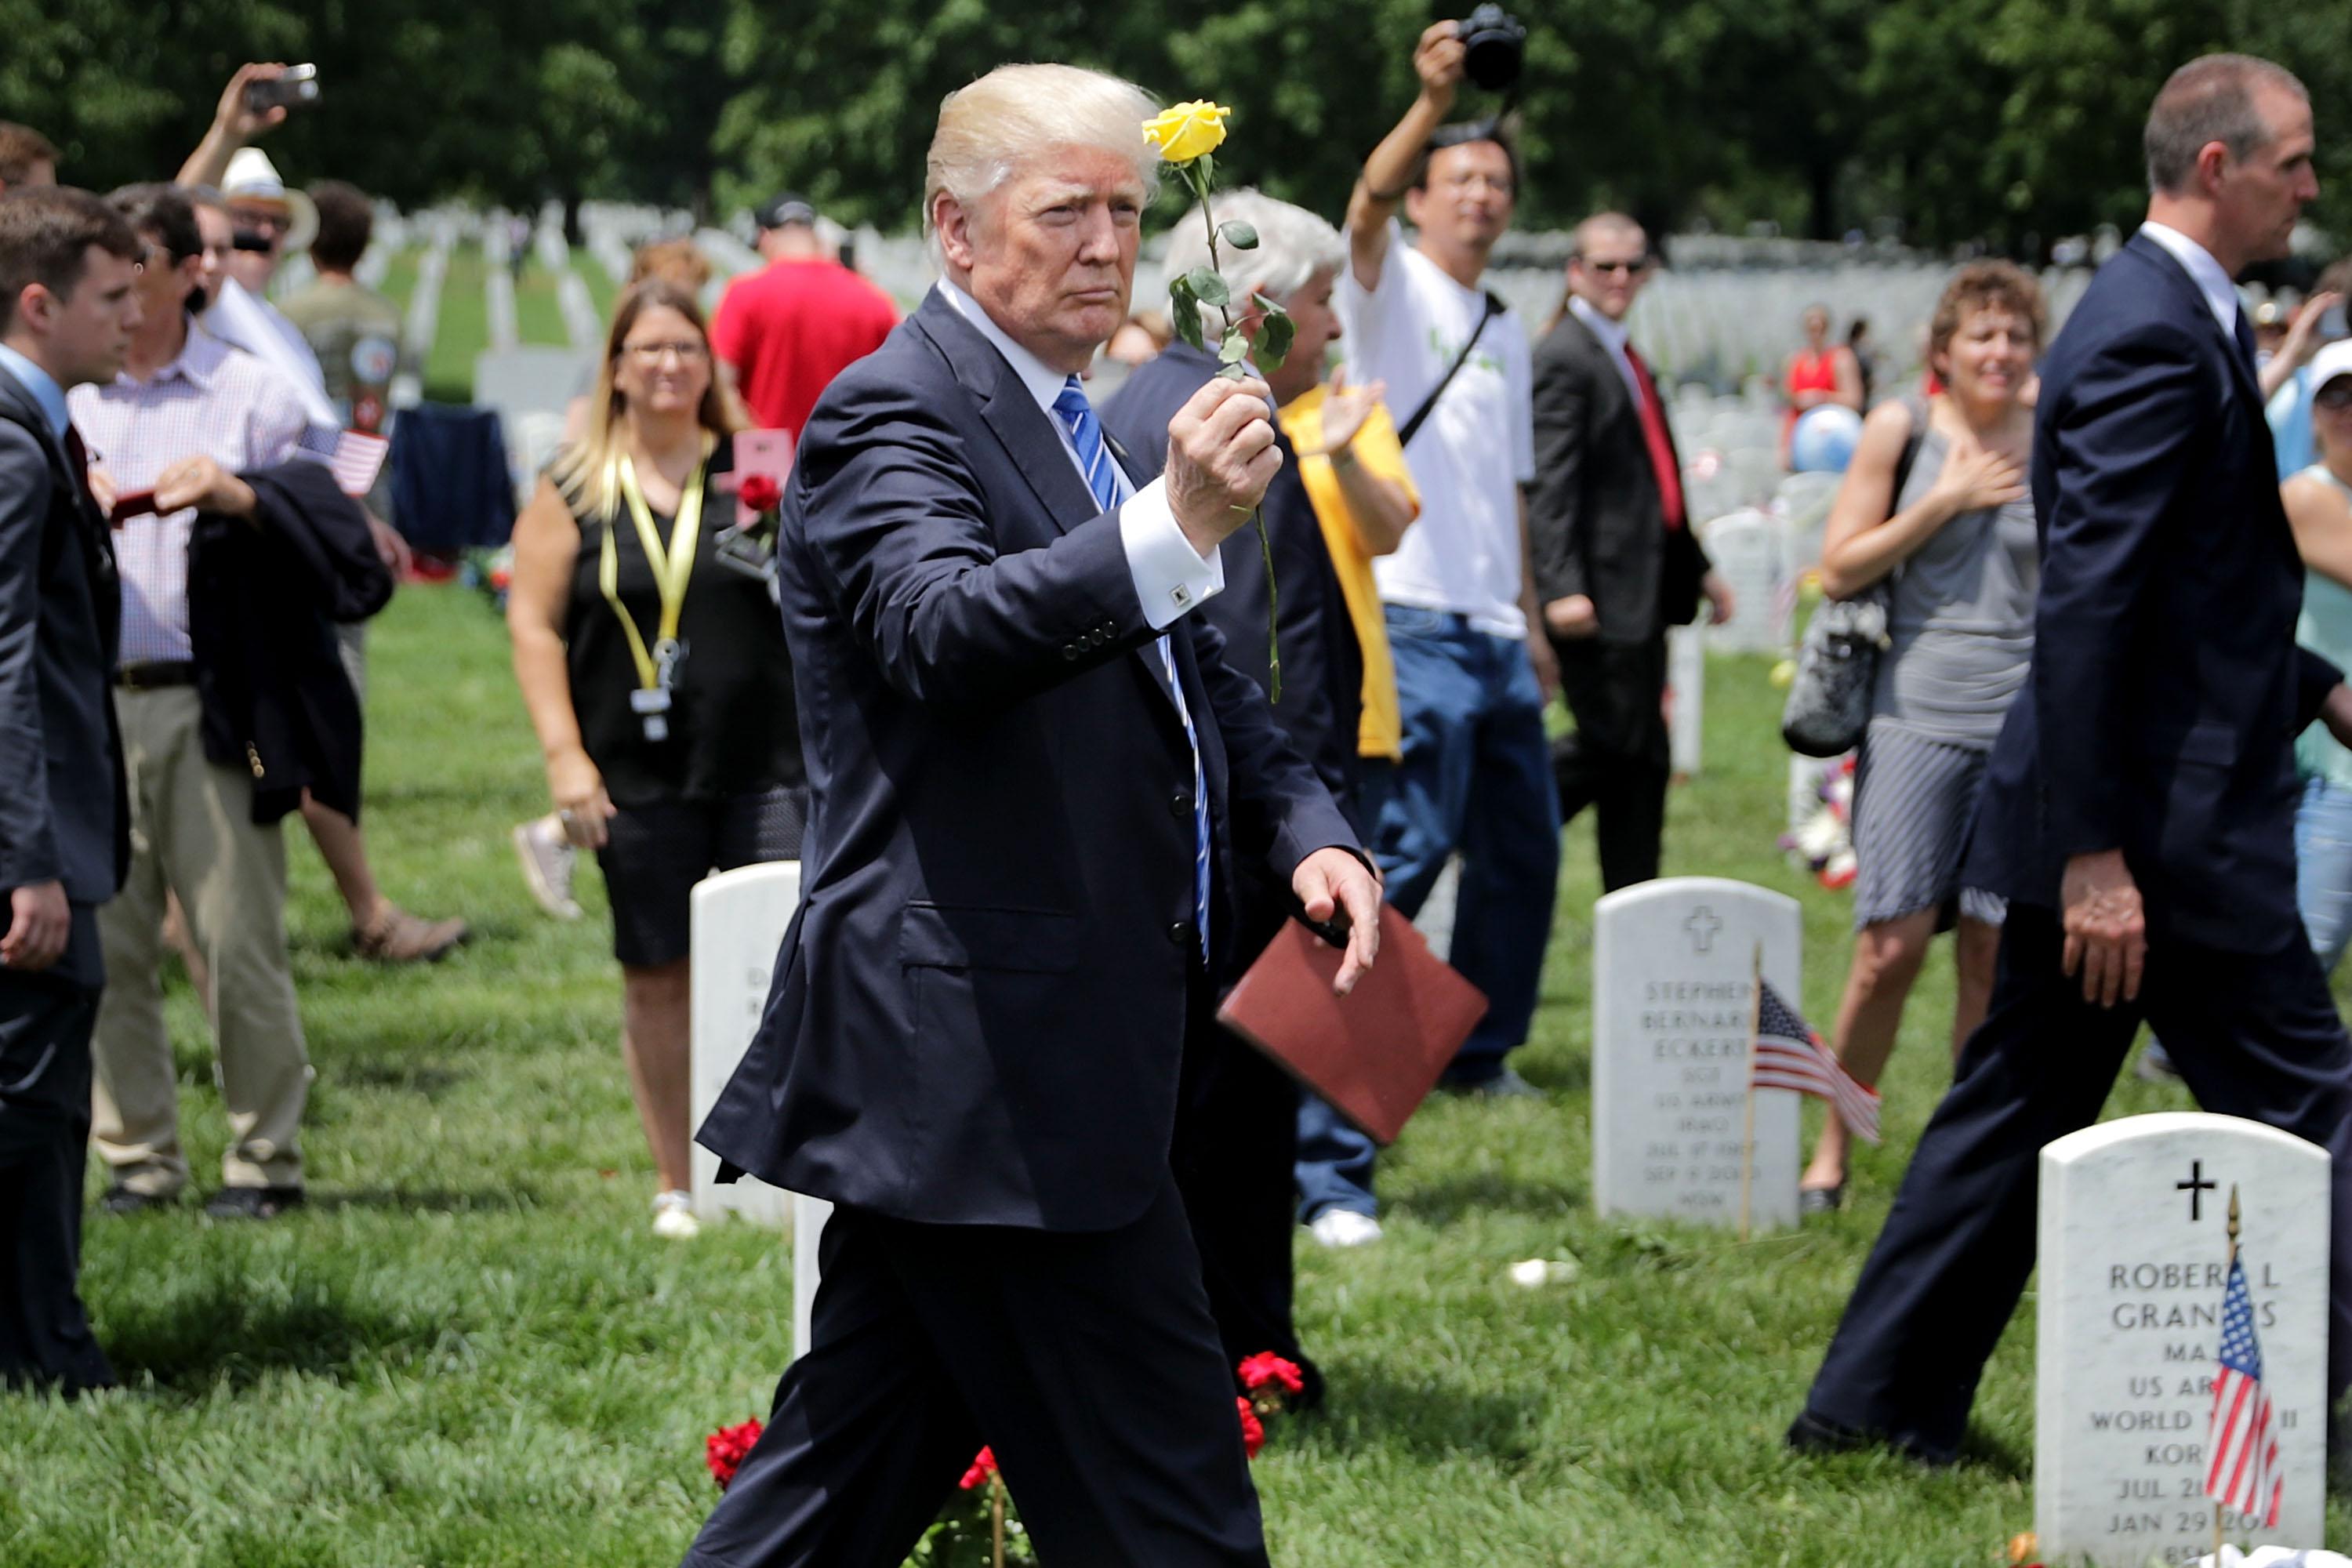 Trump holds up a yellow rose as he walks through the cemetery.